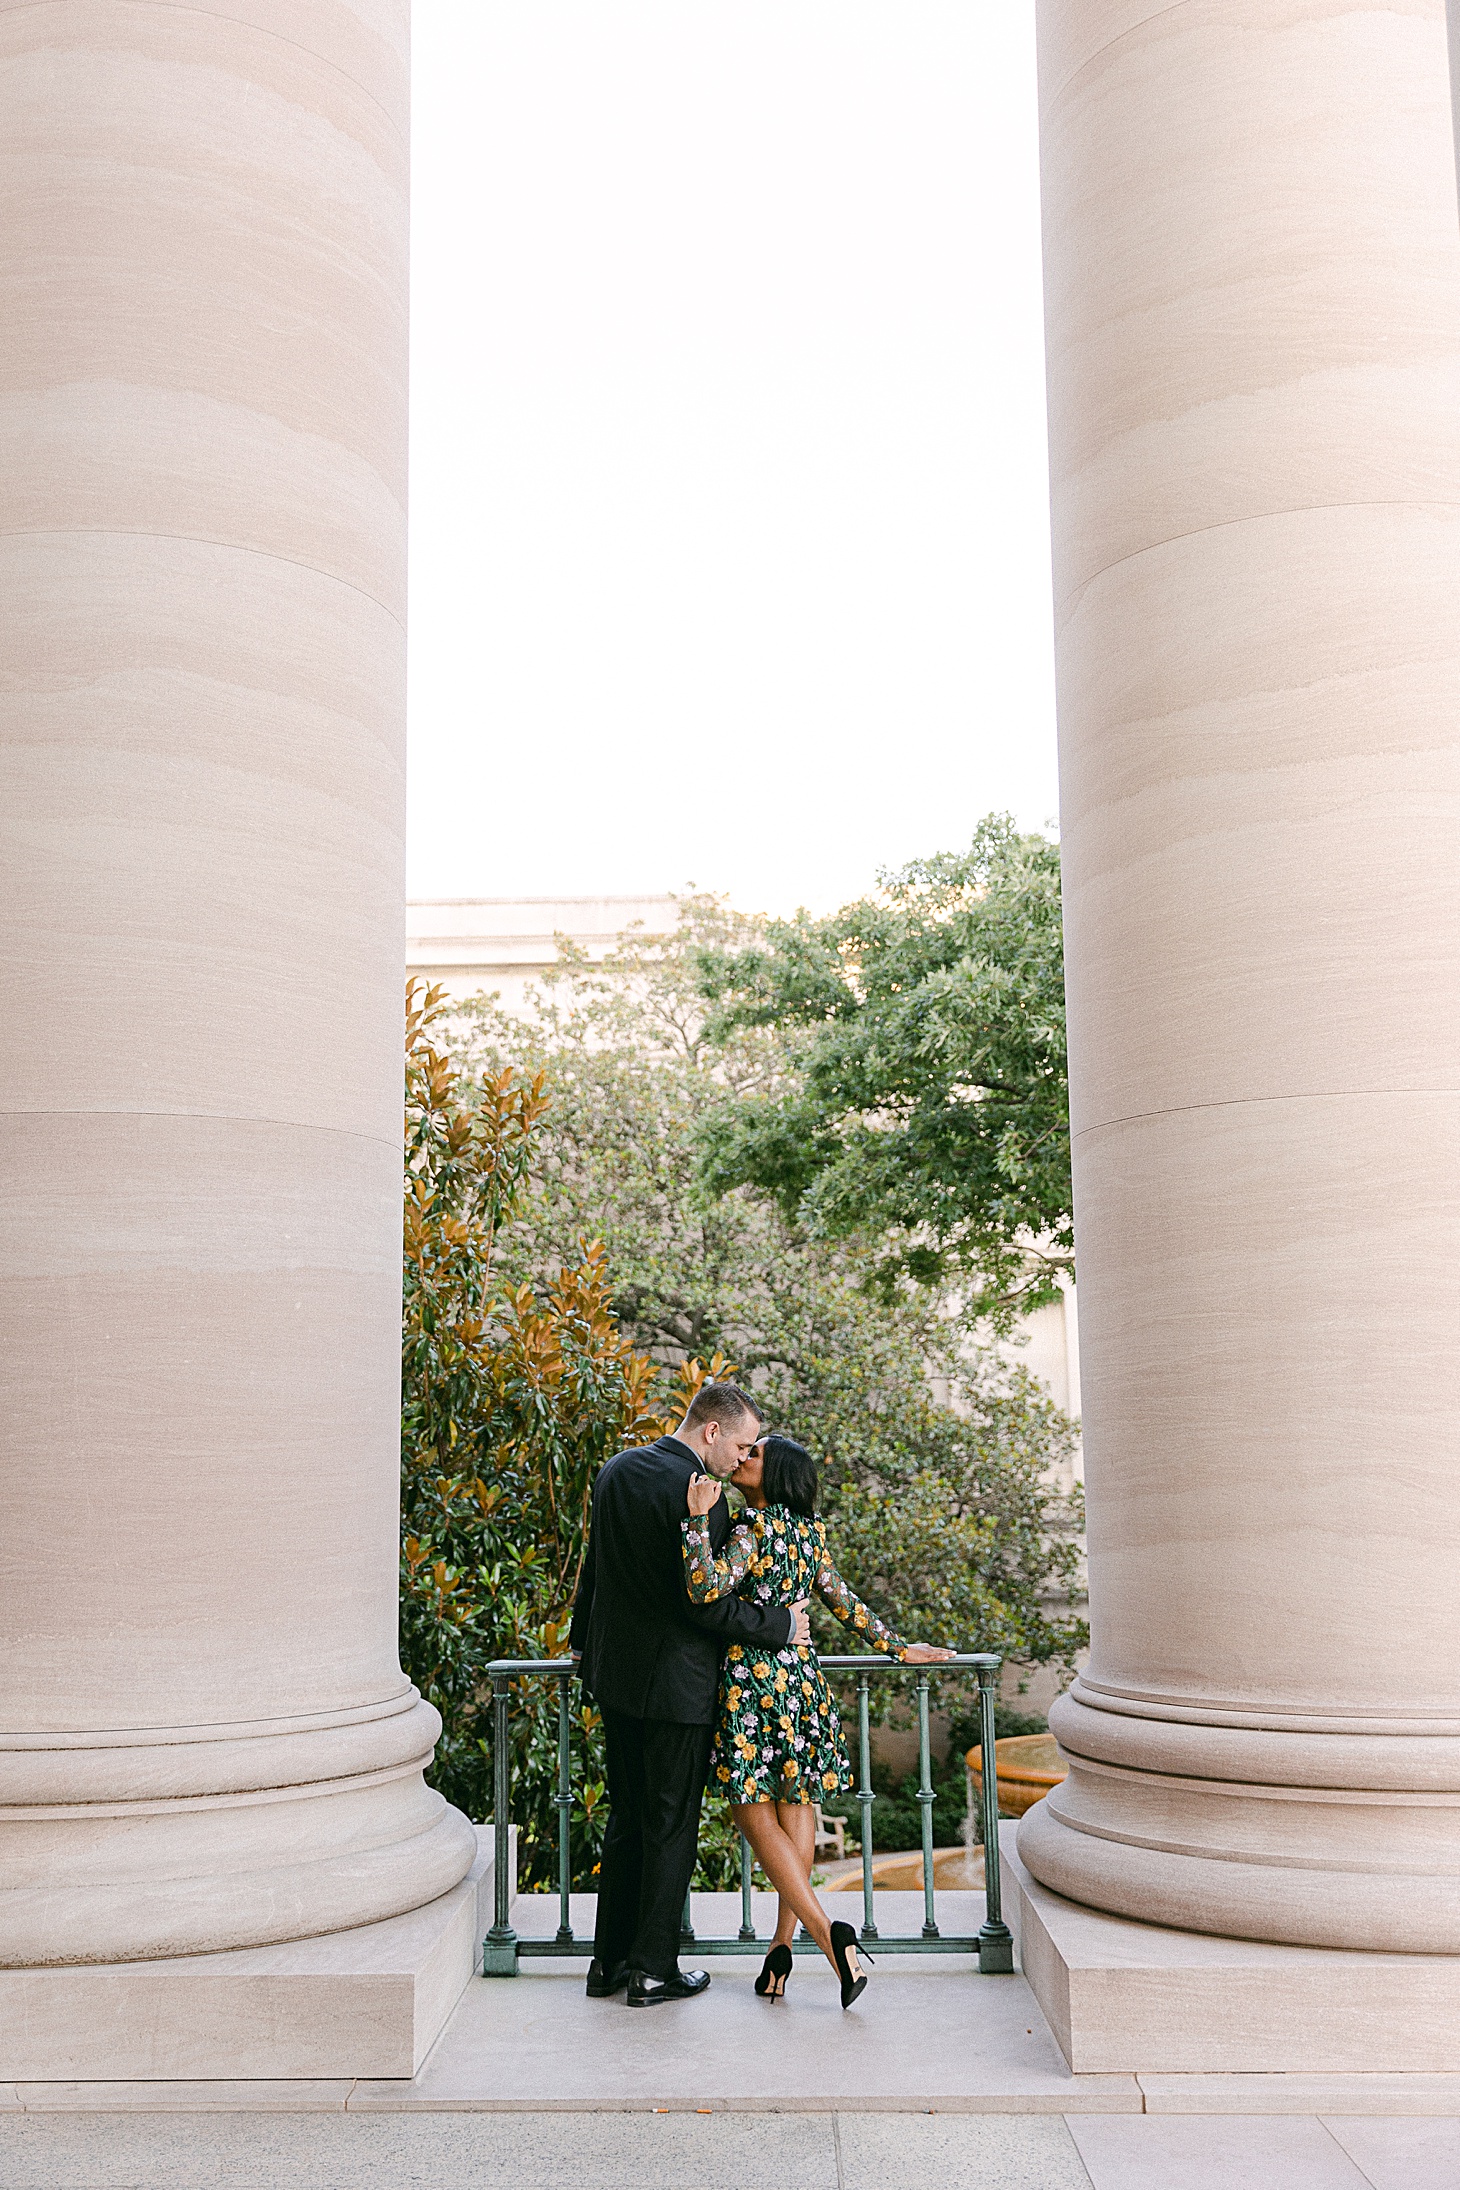 Evening  engagement portraits at National Gallery of Art by Sarah Bradshaw Photography